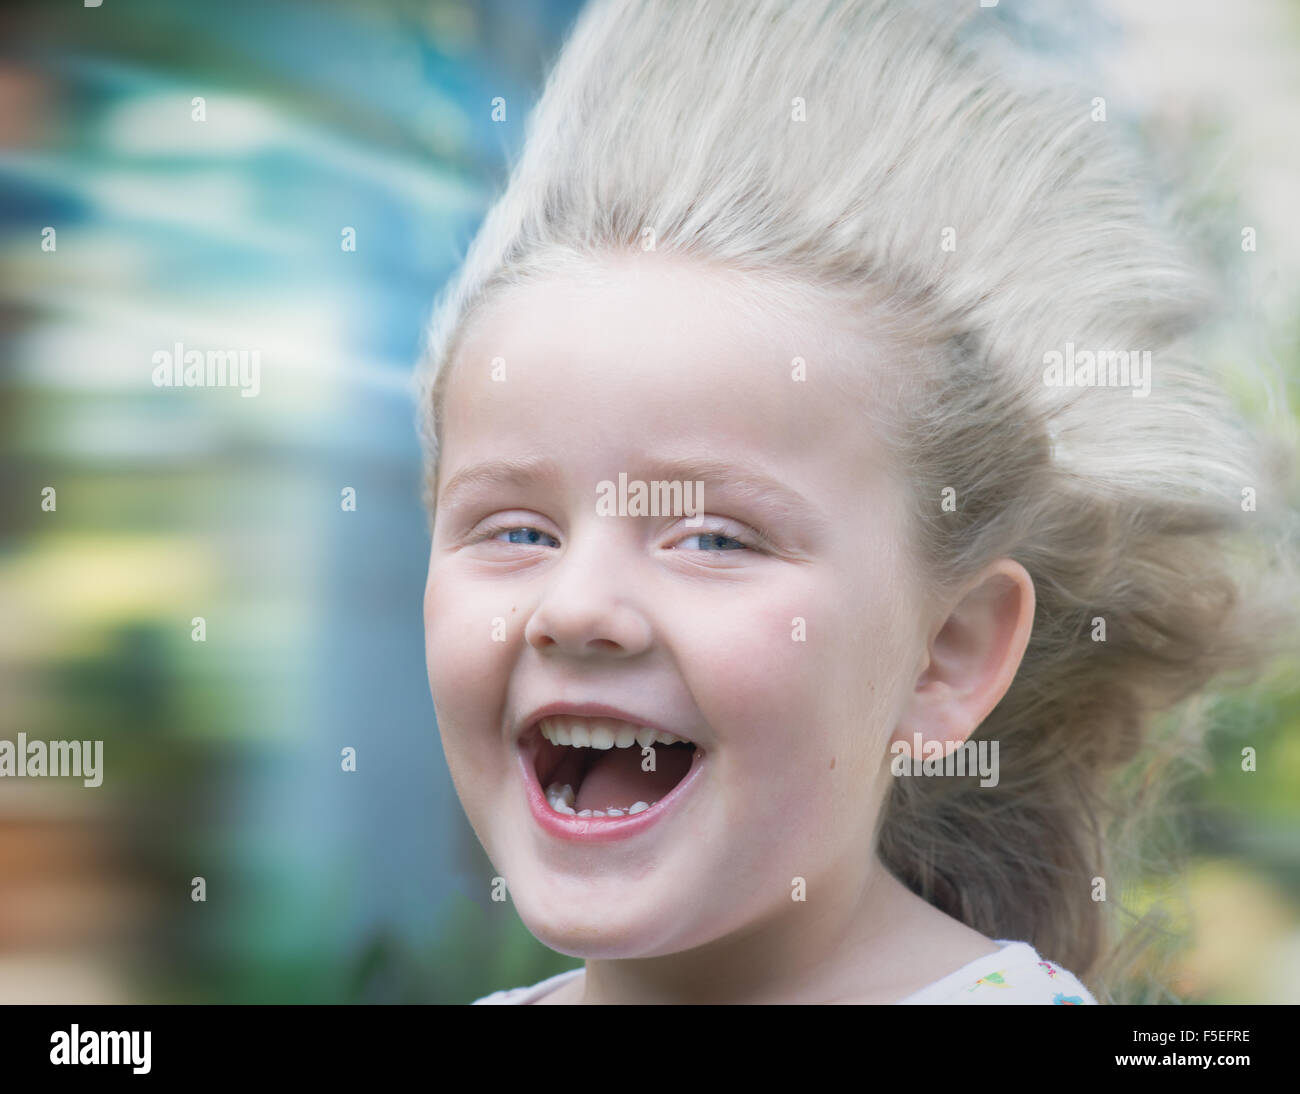 Portrait of a girl with hair blowing in wind Stock Photo